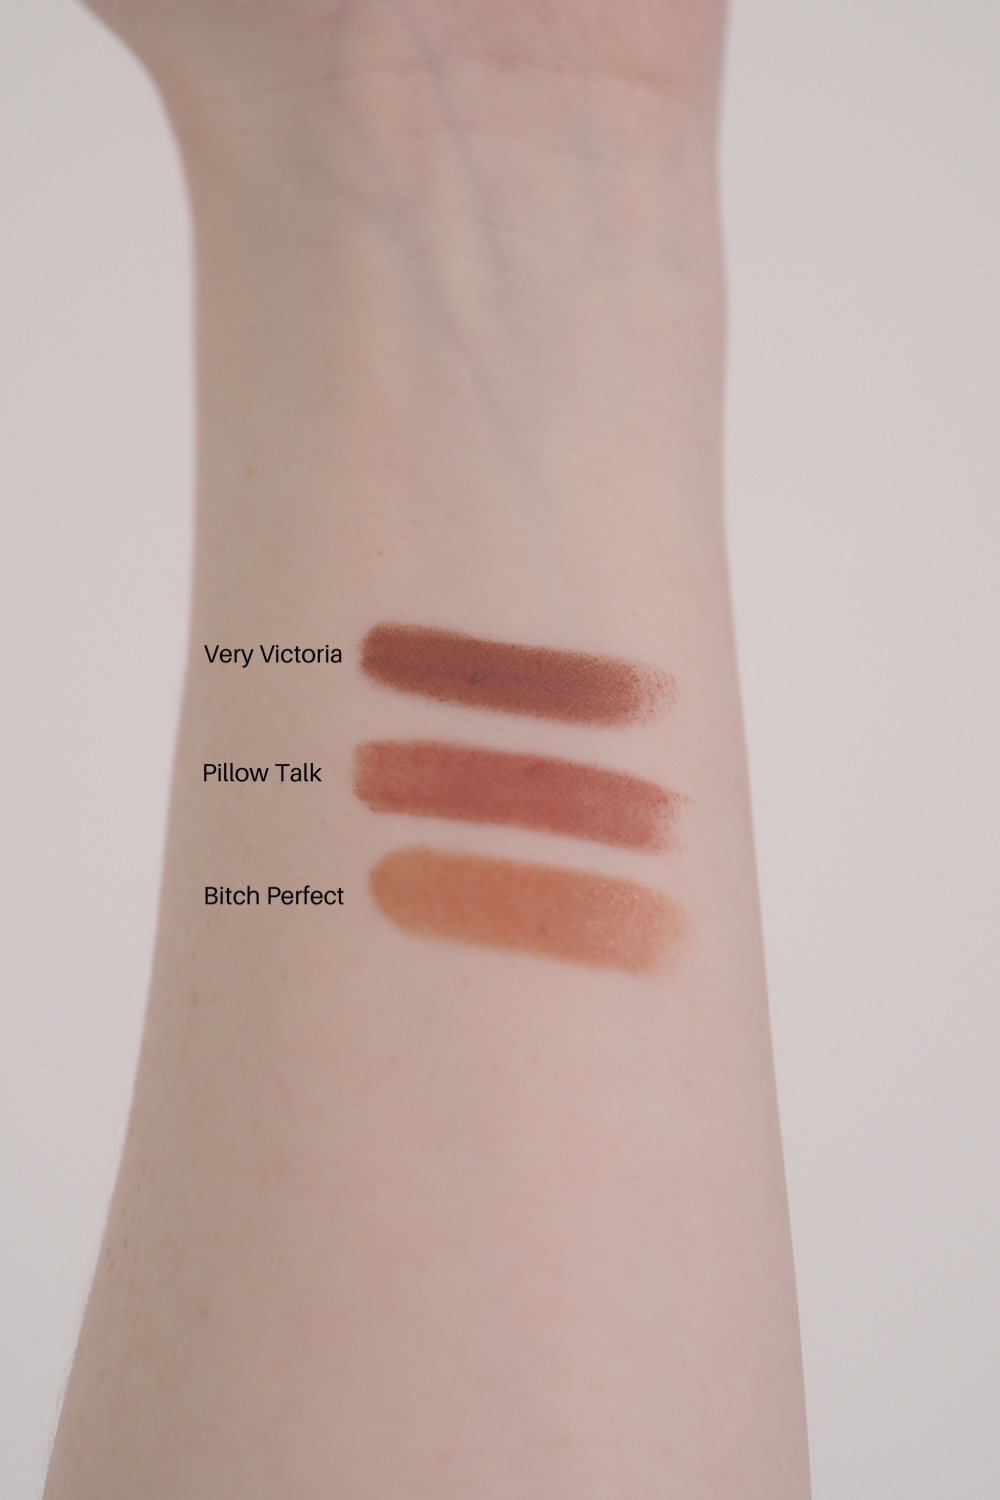 Favourite Everyday Lipsticks for Pale Skin Charlotte Tilbury Very Victoria Pillow Talk Bitch Perfect swatches